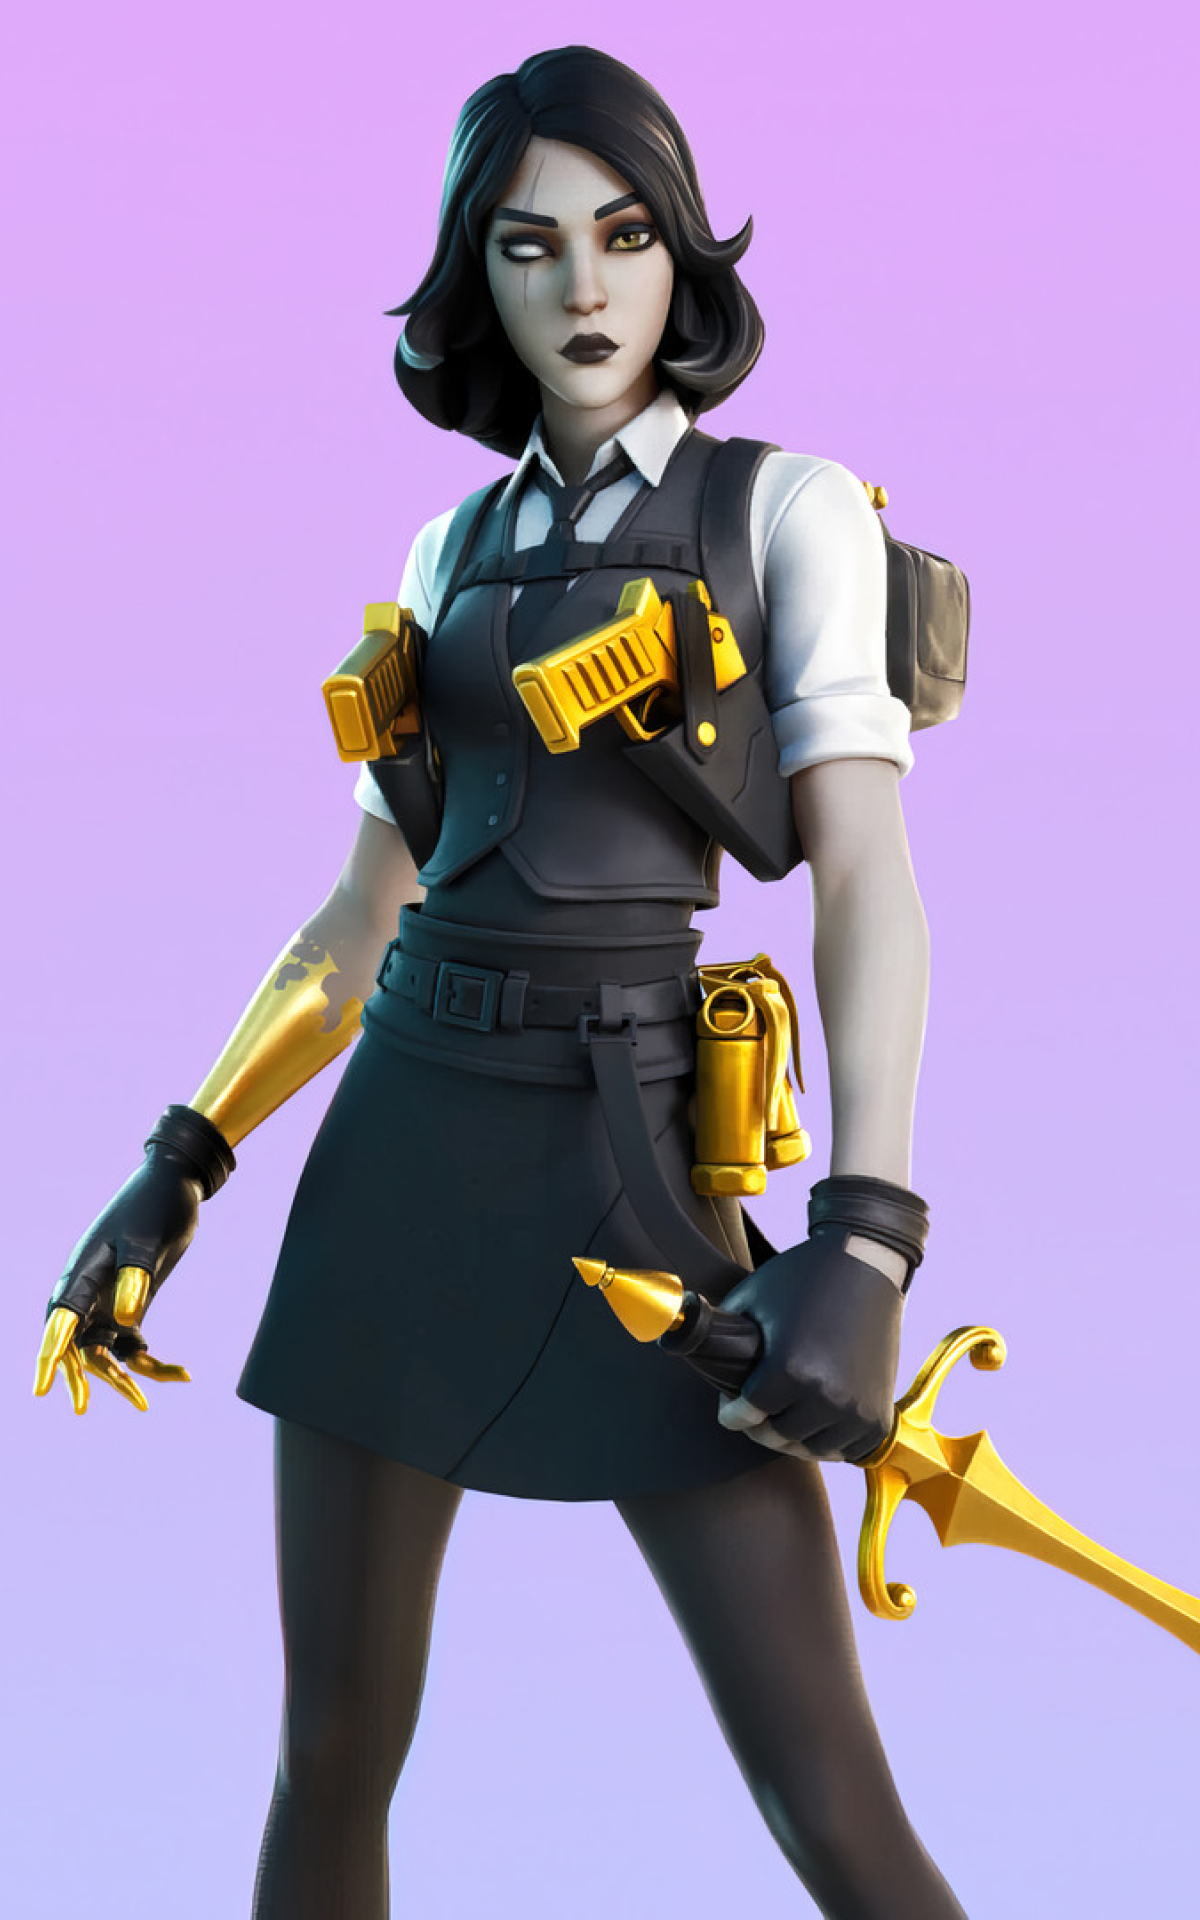 1200x1920 Resolution Fortnite Marigold Outfit Skin 1200x1920 Resolution ...